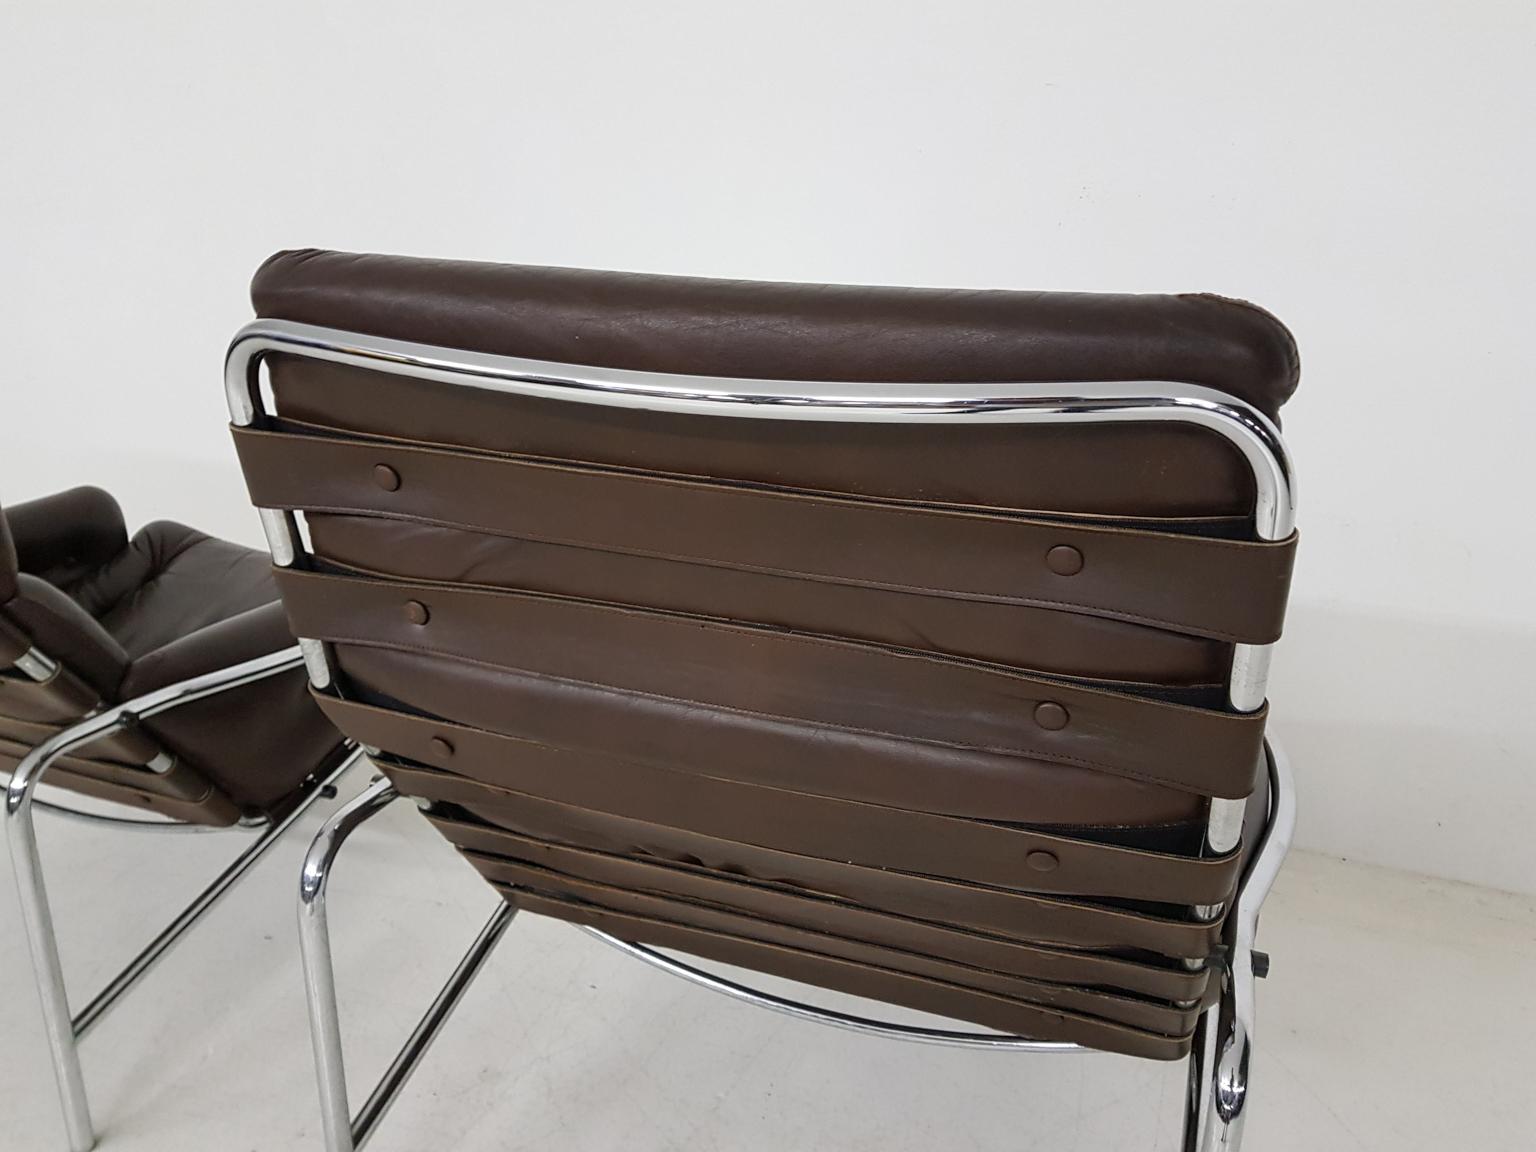 Metal 1x Nagoya Brown Leather Lounge Chair by Martin Visser for ’t Spectrum, Dutch '69